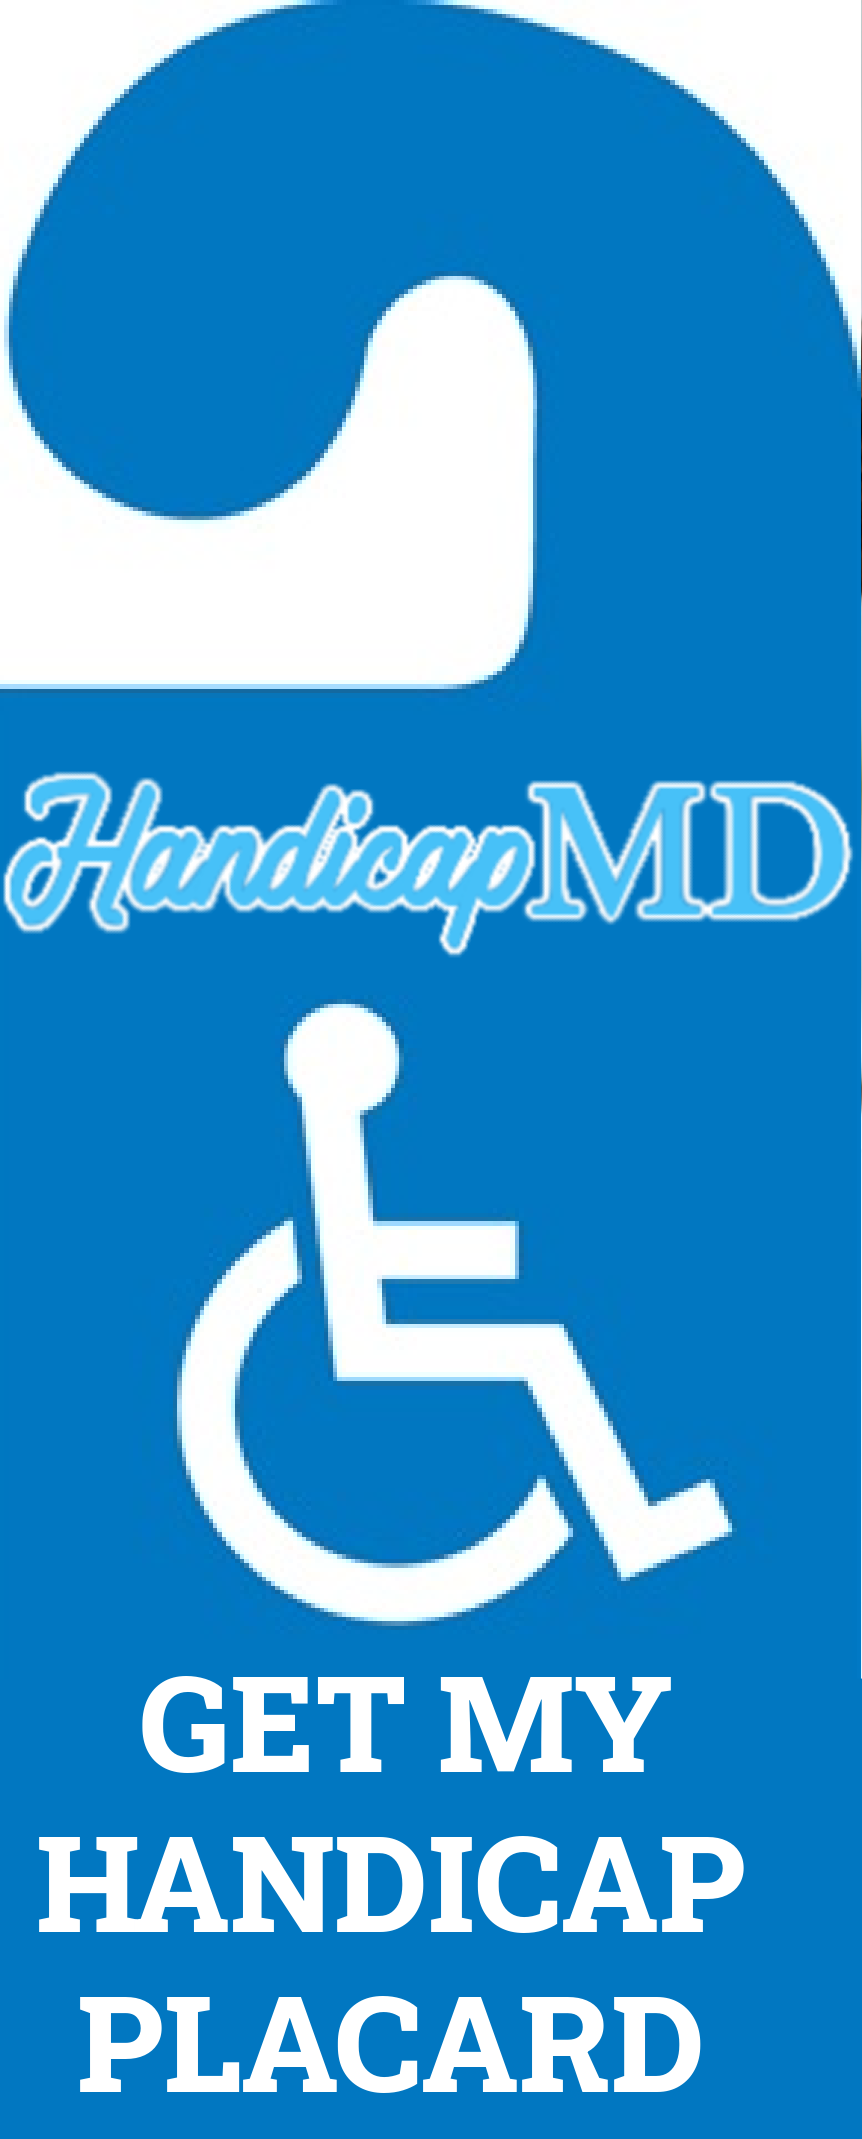 Myths vs. Facts: Debunking Common Misconceptions about Handicap Placards in Pennsylvania